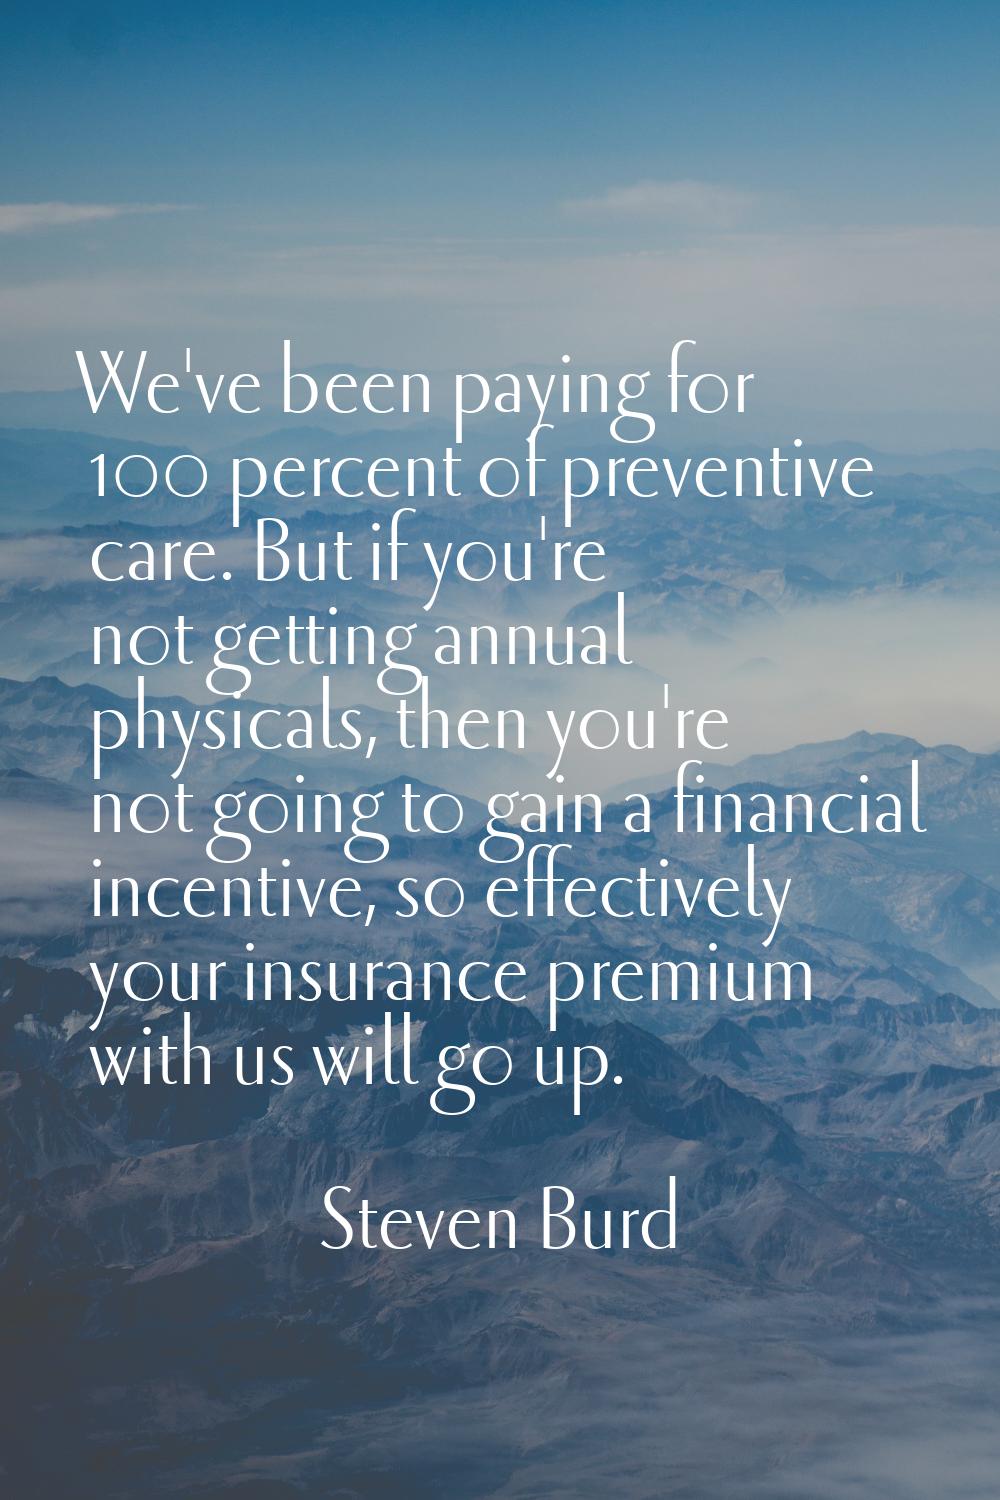 We've been paying for 100 percent of preventive care. But if you're not getting annual physicals, t